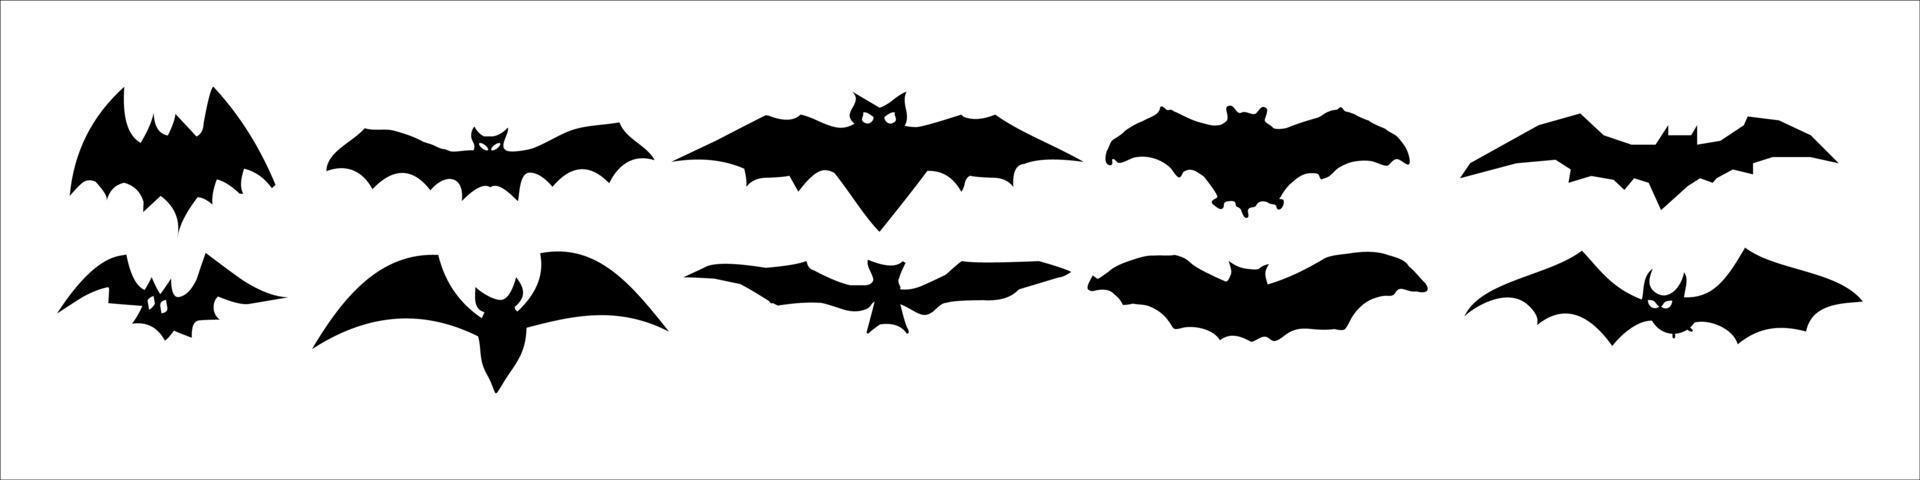 Black silhouettes of bats vector